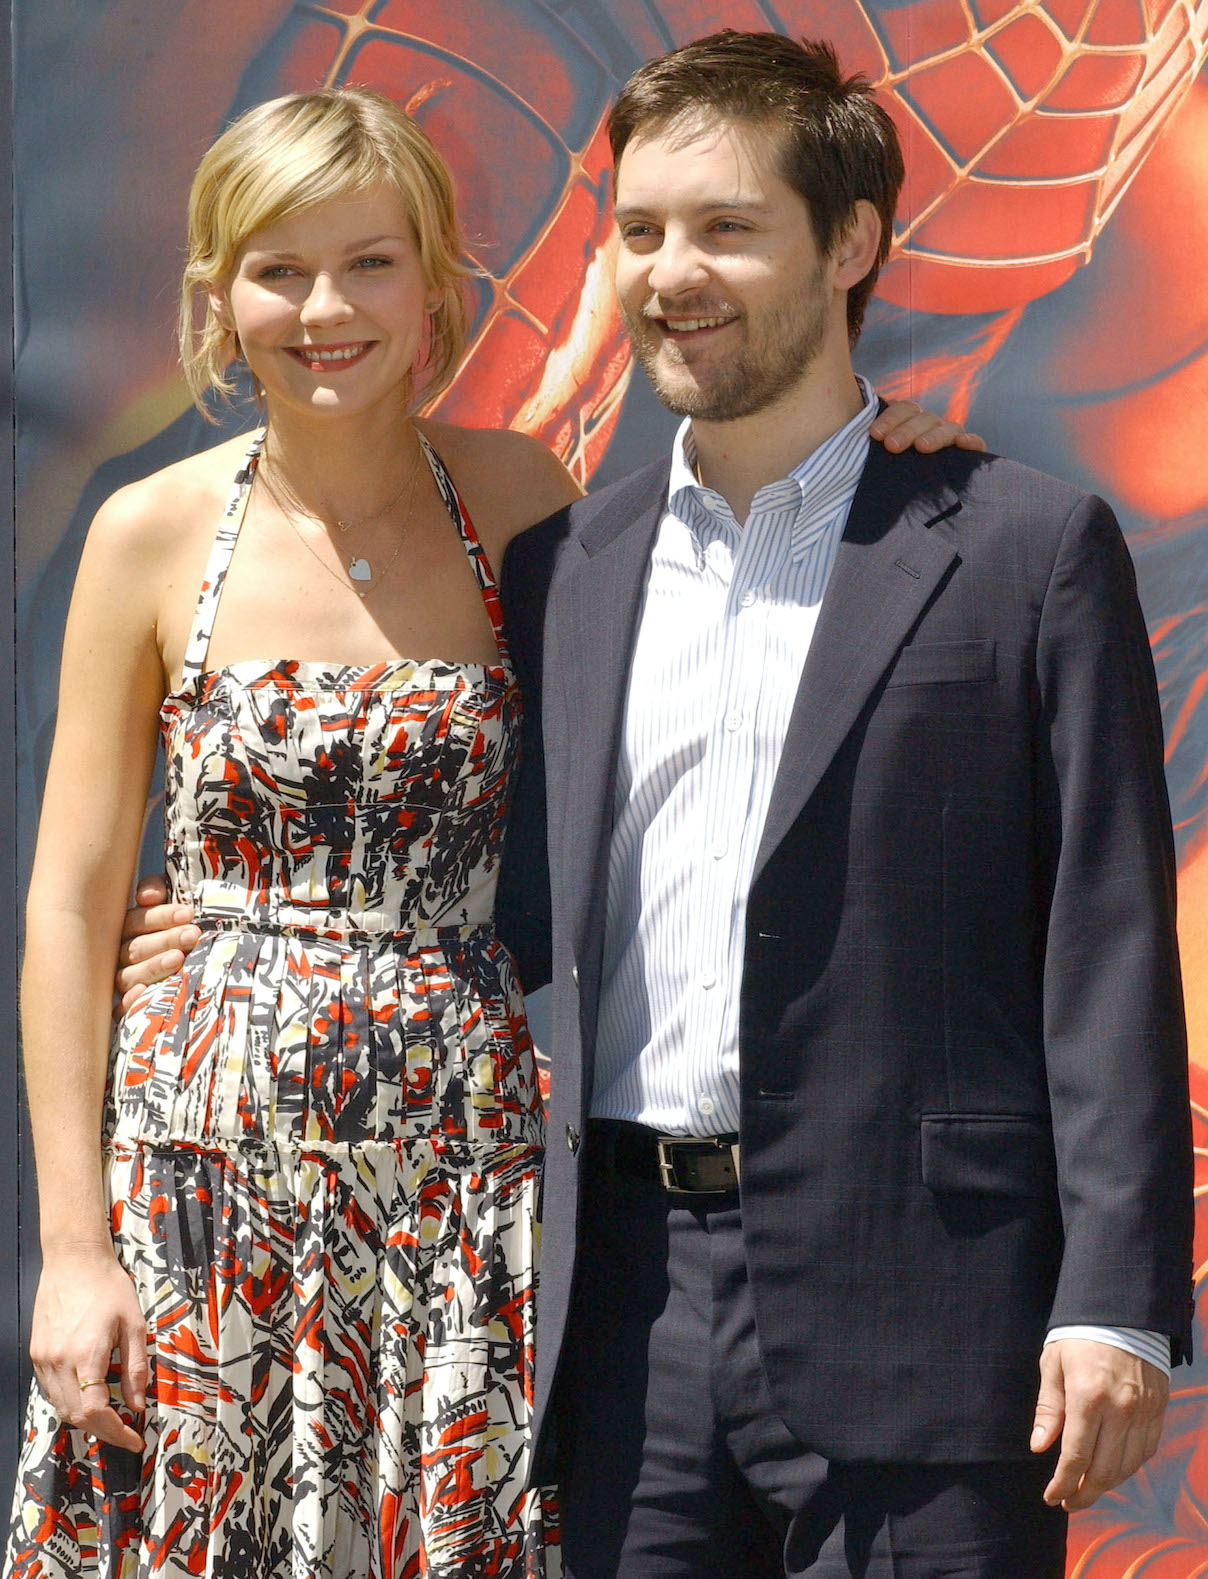 Kirsten Dunst and Tobey Maguire at a photocall for 'Spider-Man 2' 